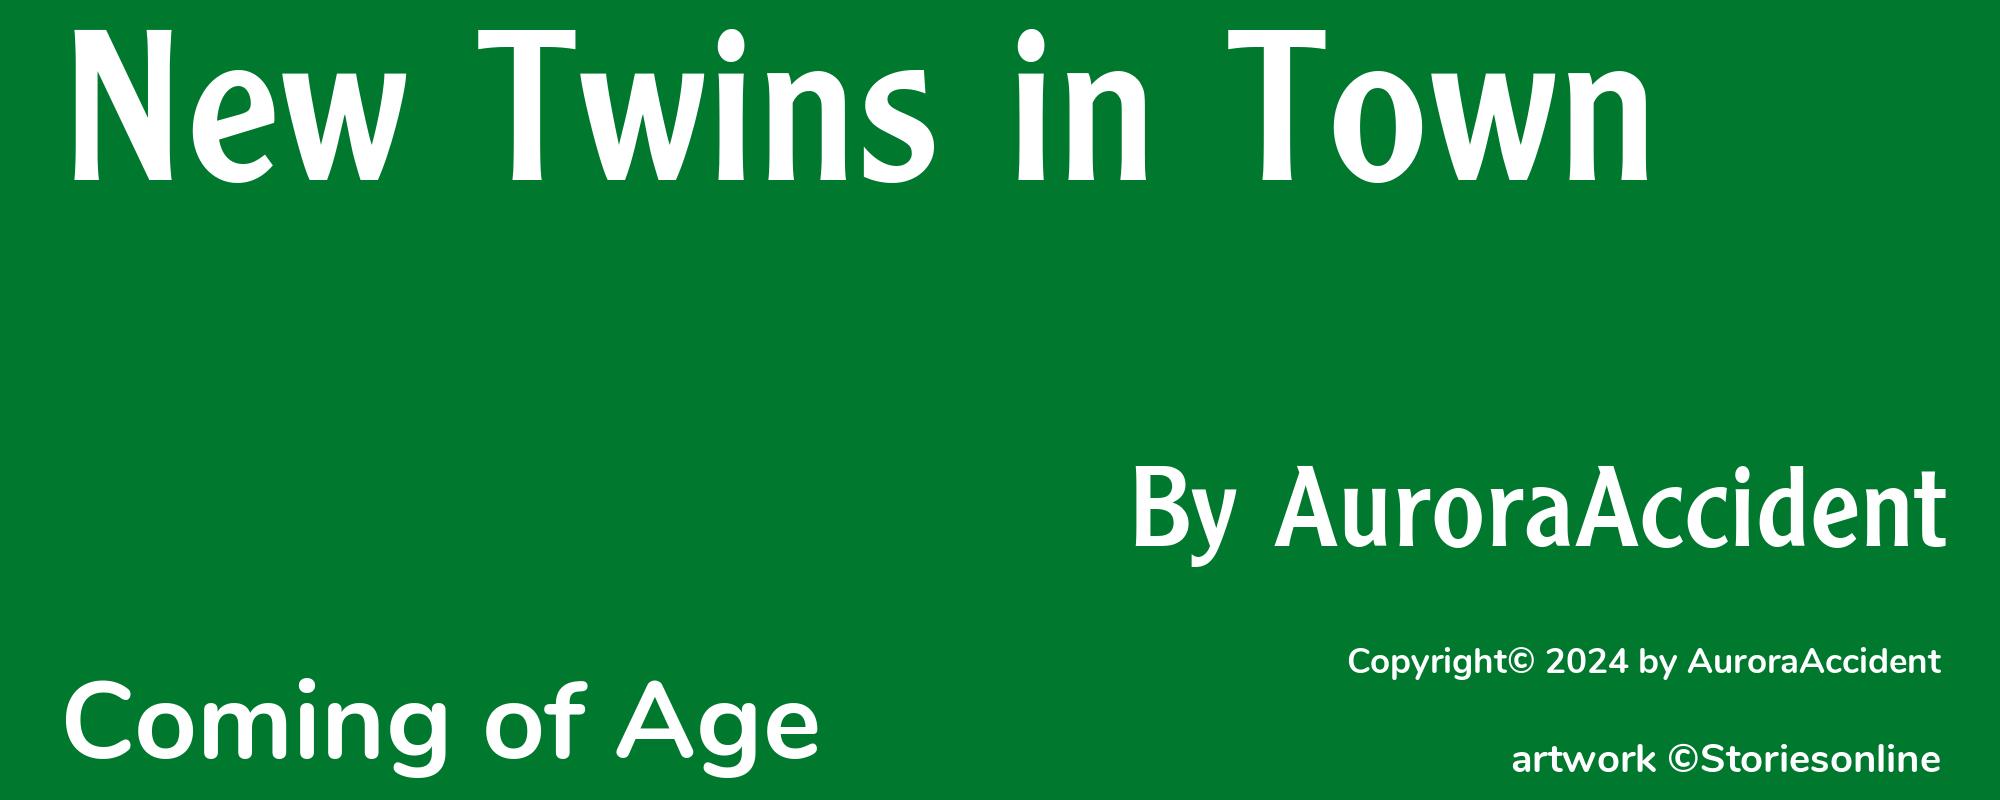 New Twins in Town - Cover